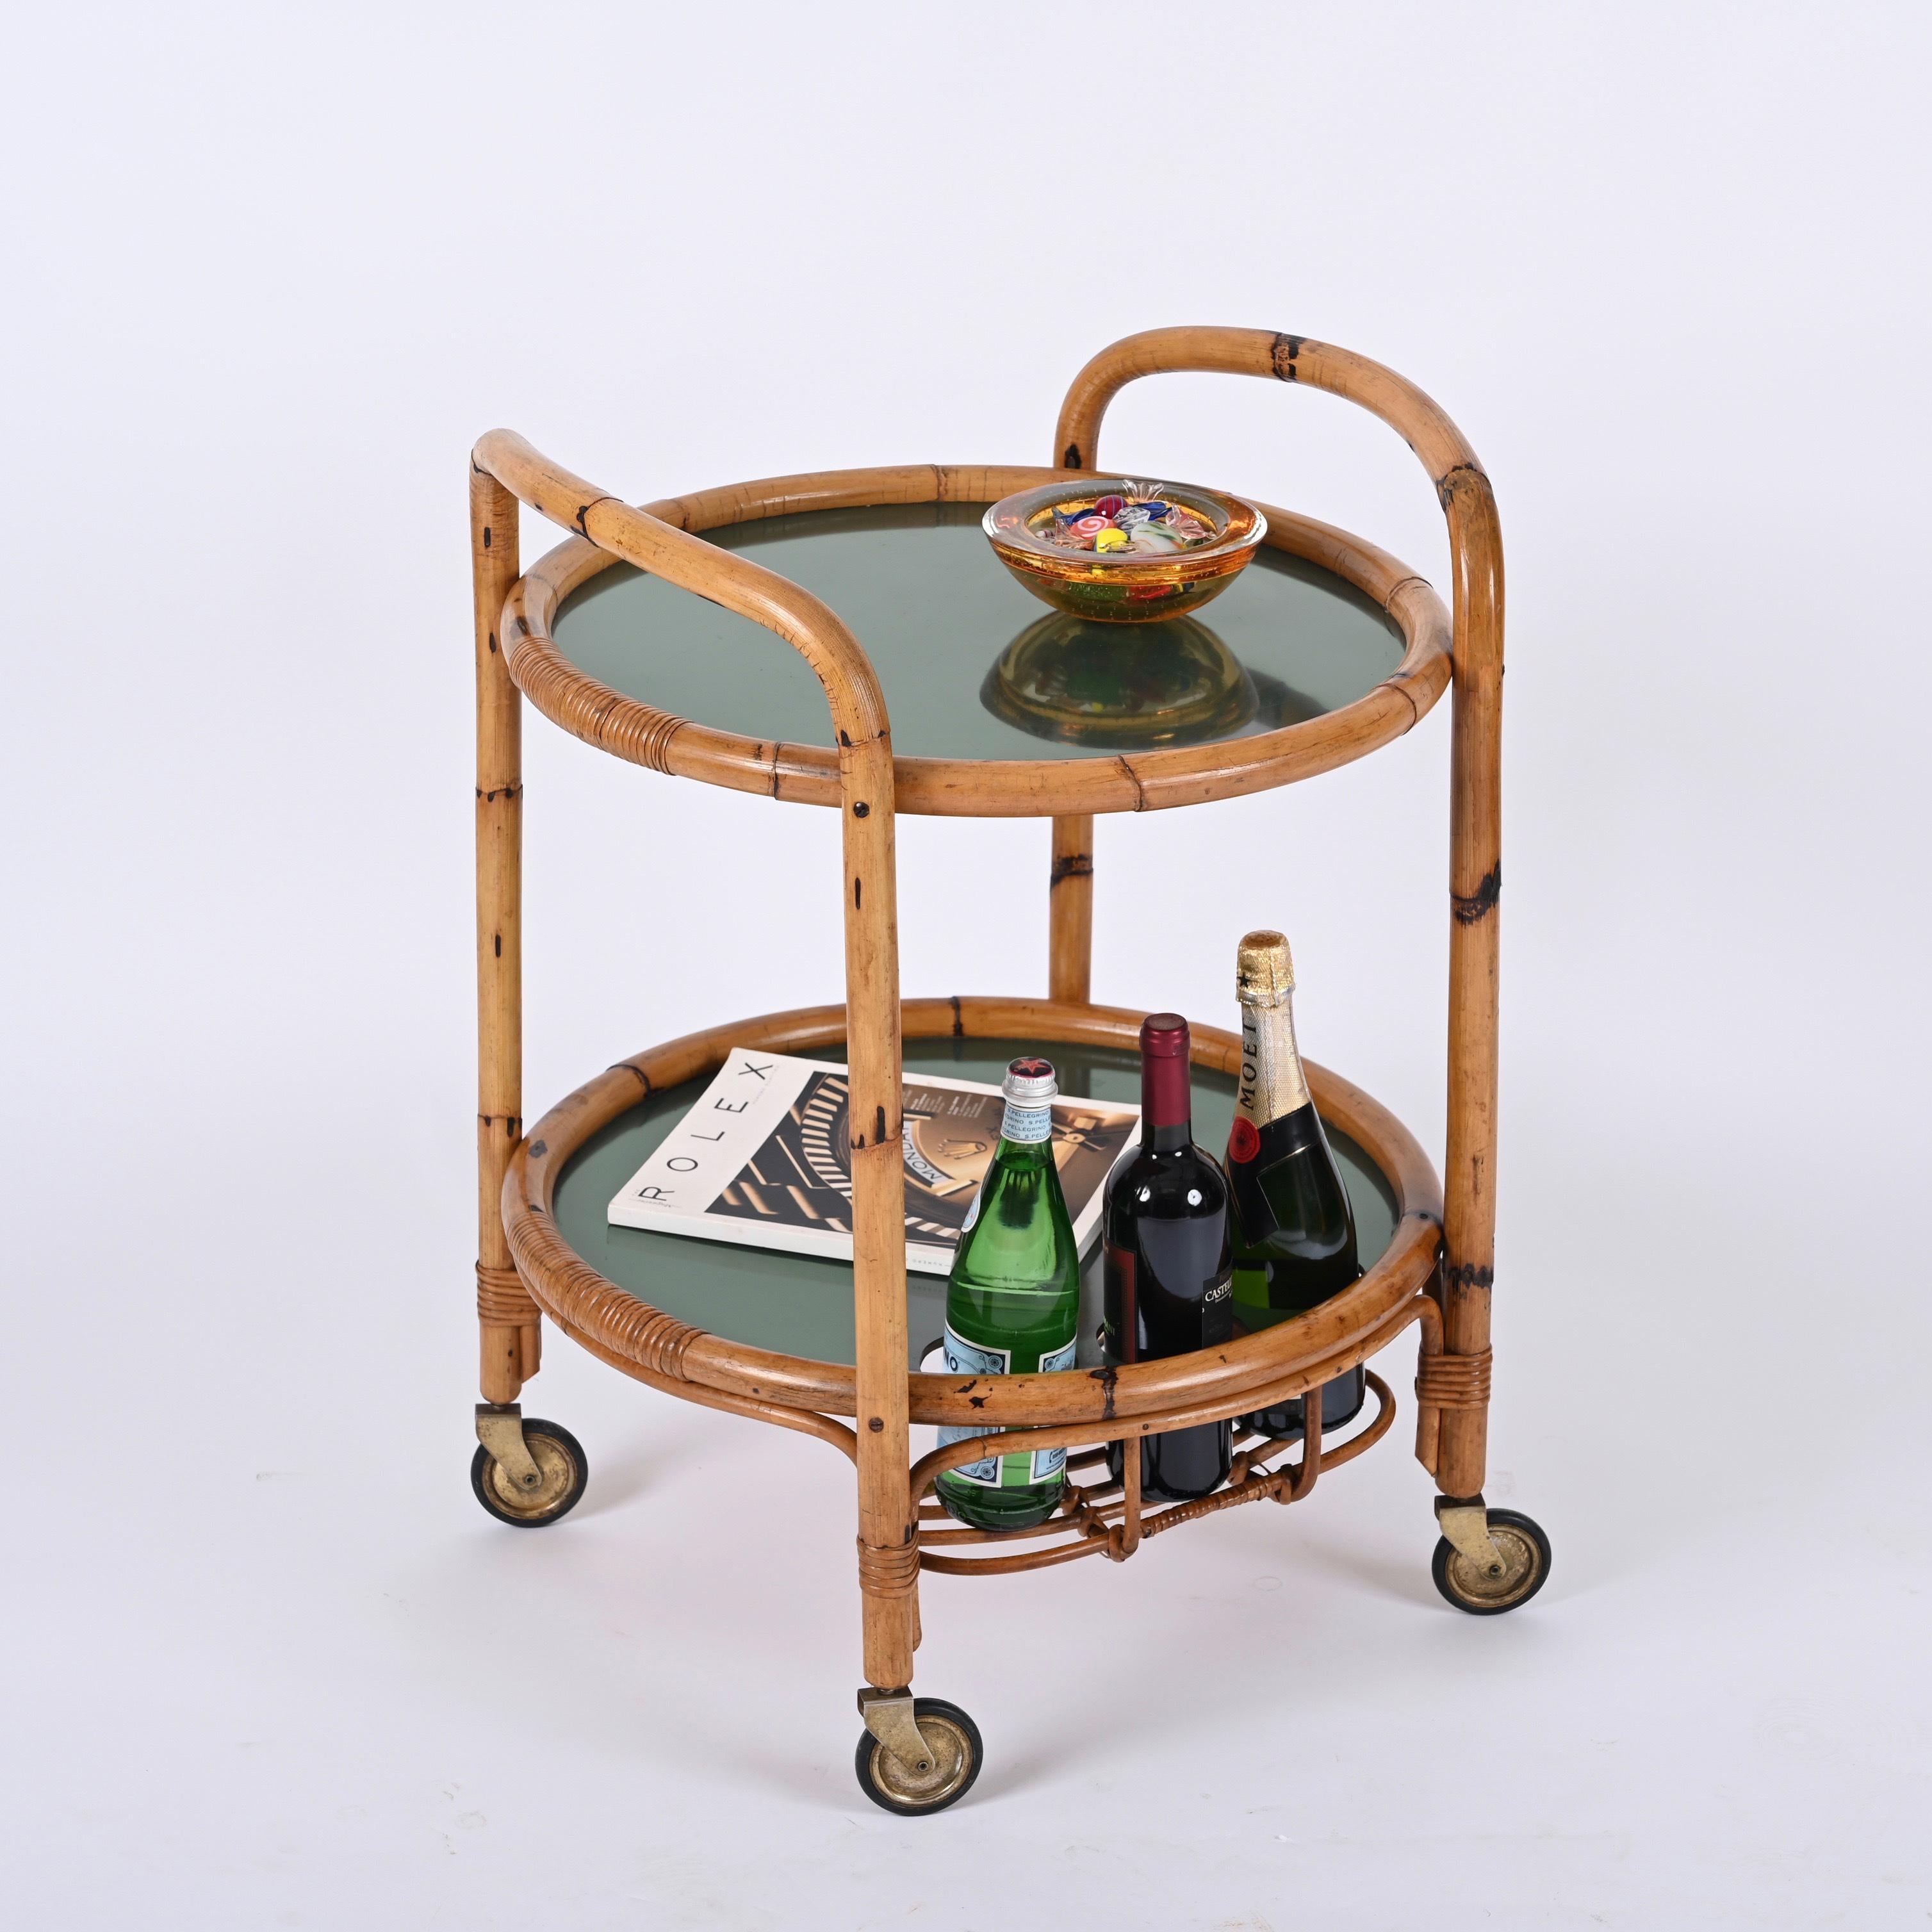 Midcentury Bar Serving Cart in Bamboo, Rattan and Green Formica, Italy, 1970s For Sale 9